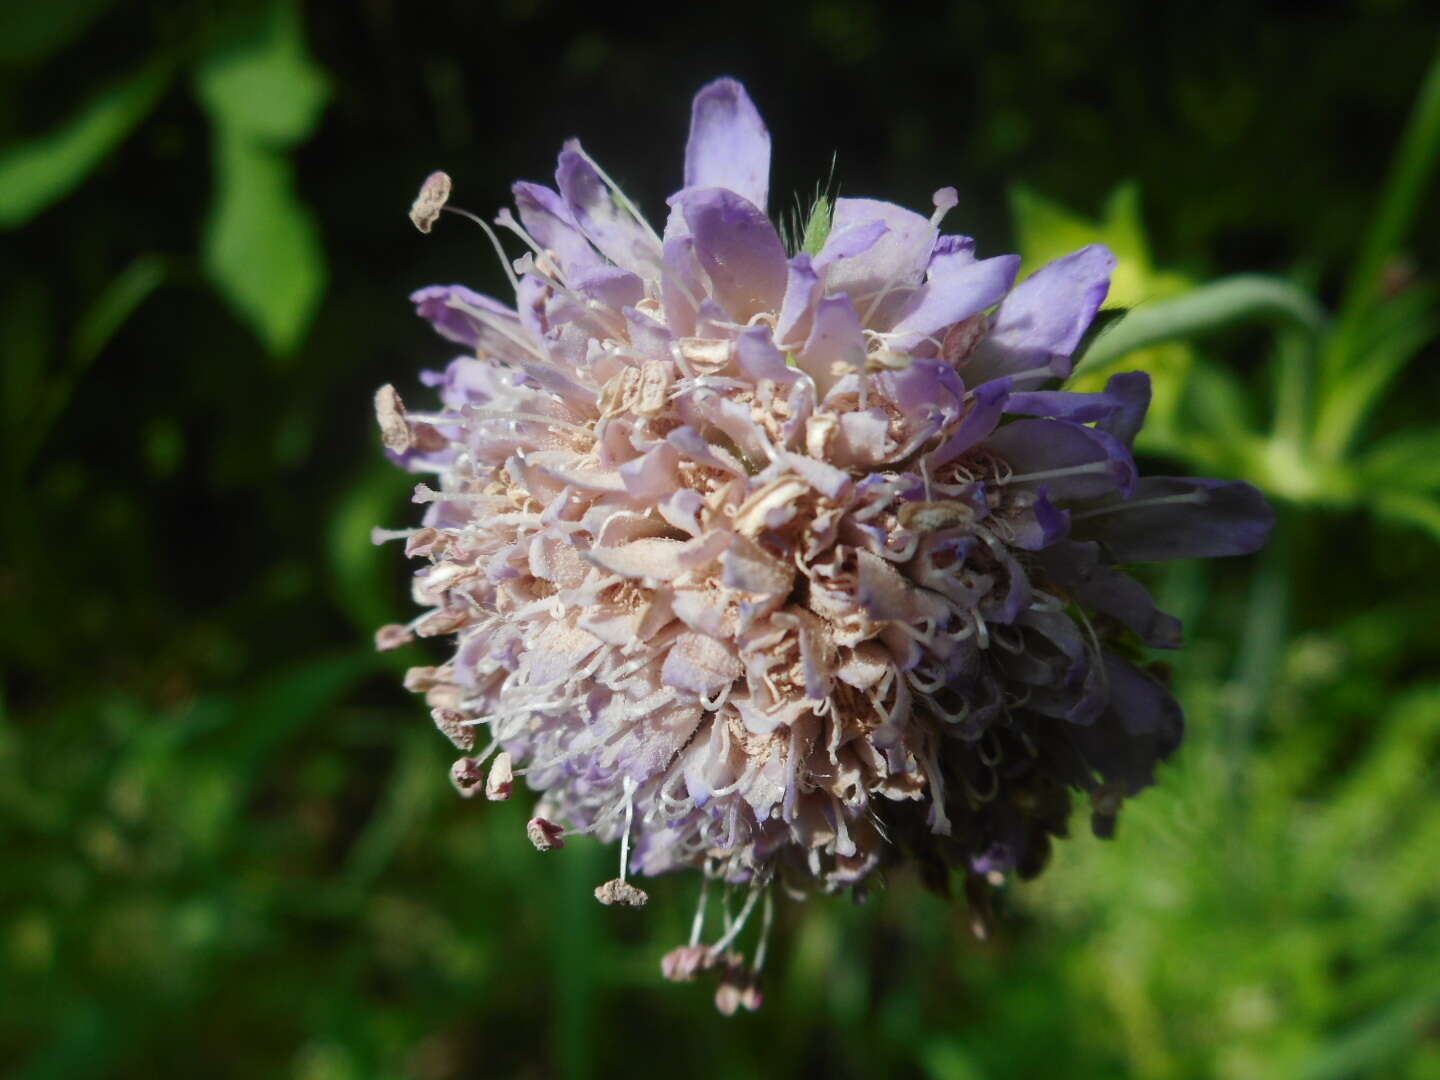 Image of Microbotryum scabiosae (Sowerby) G. Deml & Prillinger 1991